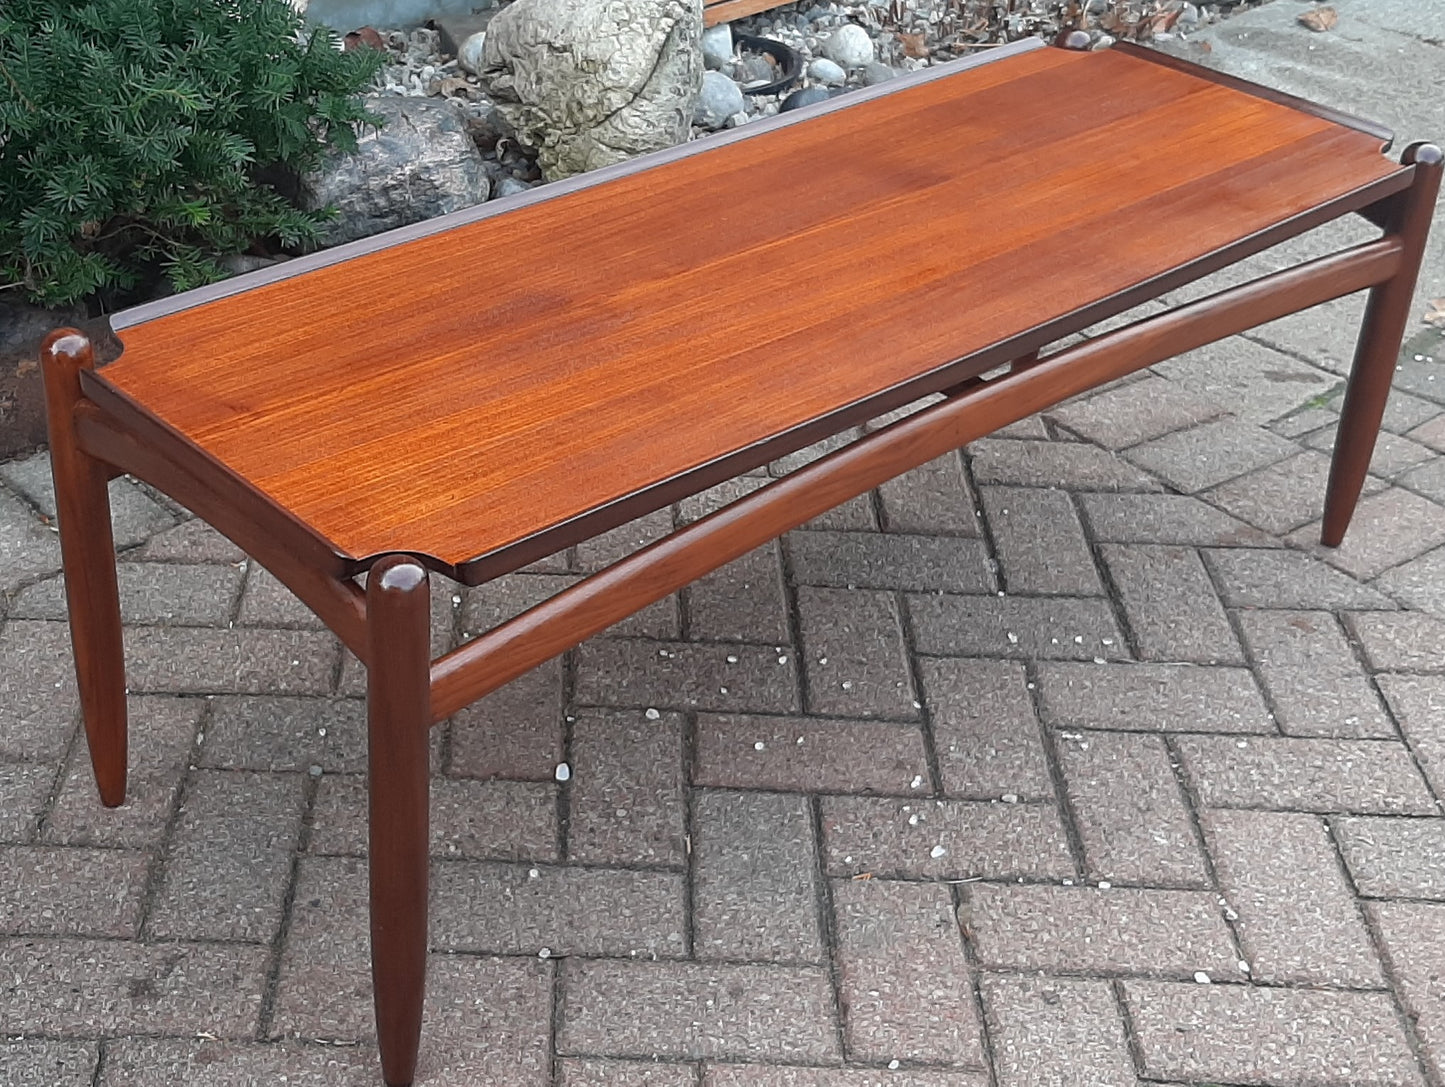 REFINISHED MCM Teak Coffee Table 49", H. Wegner style, PERFECT